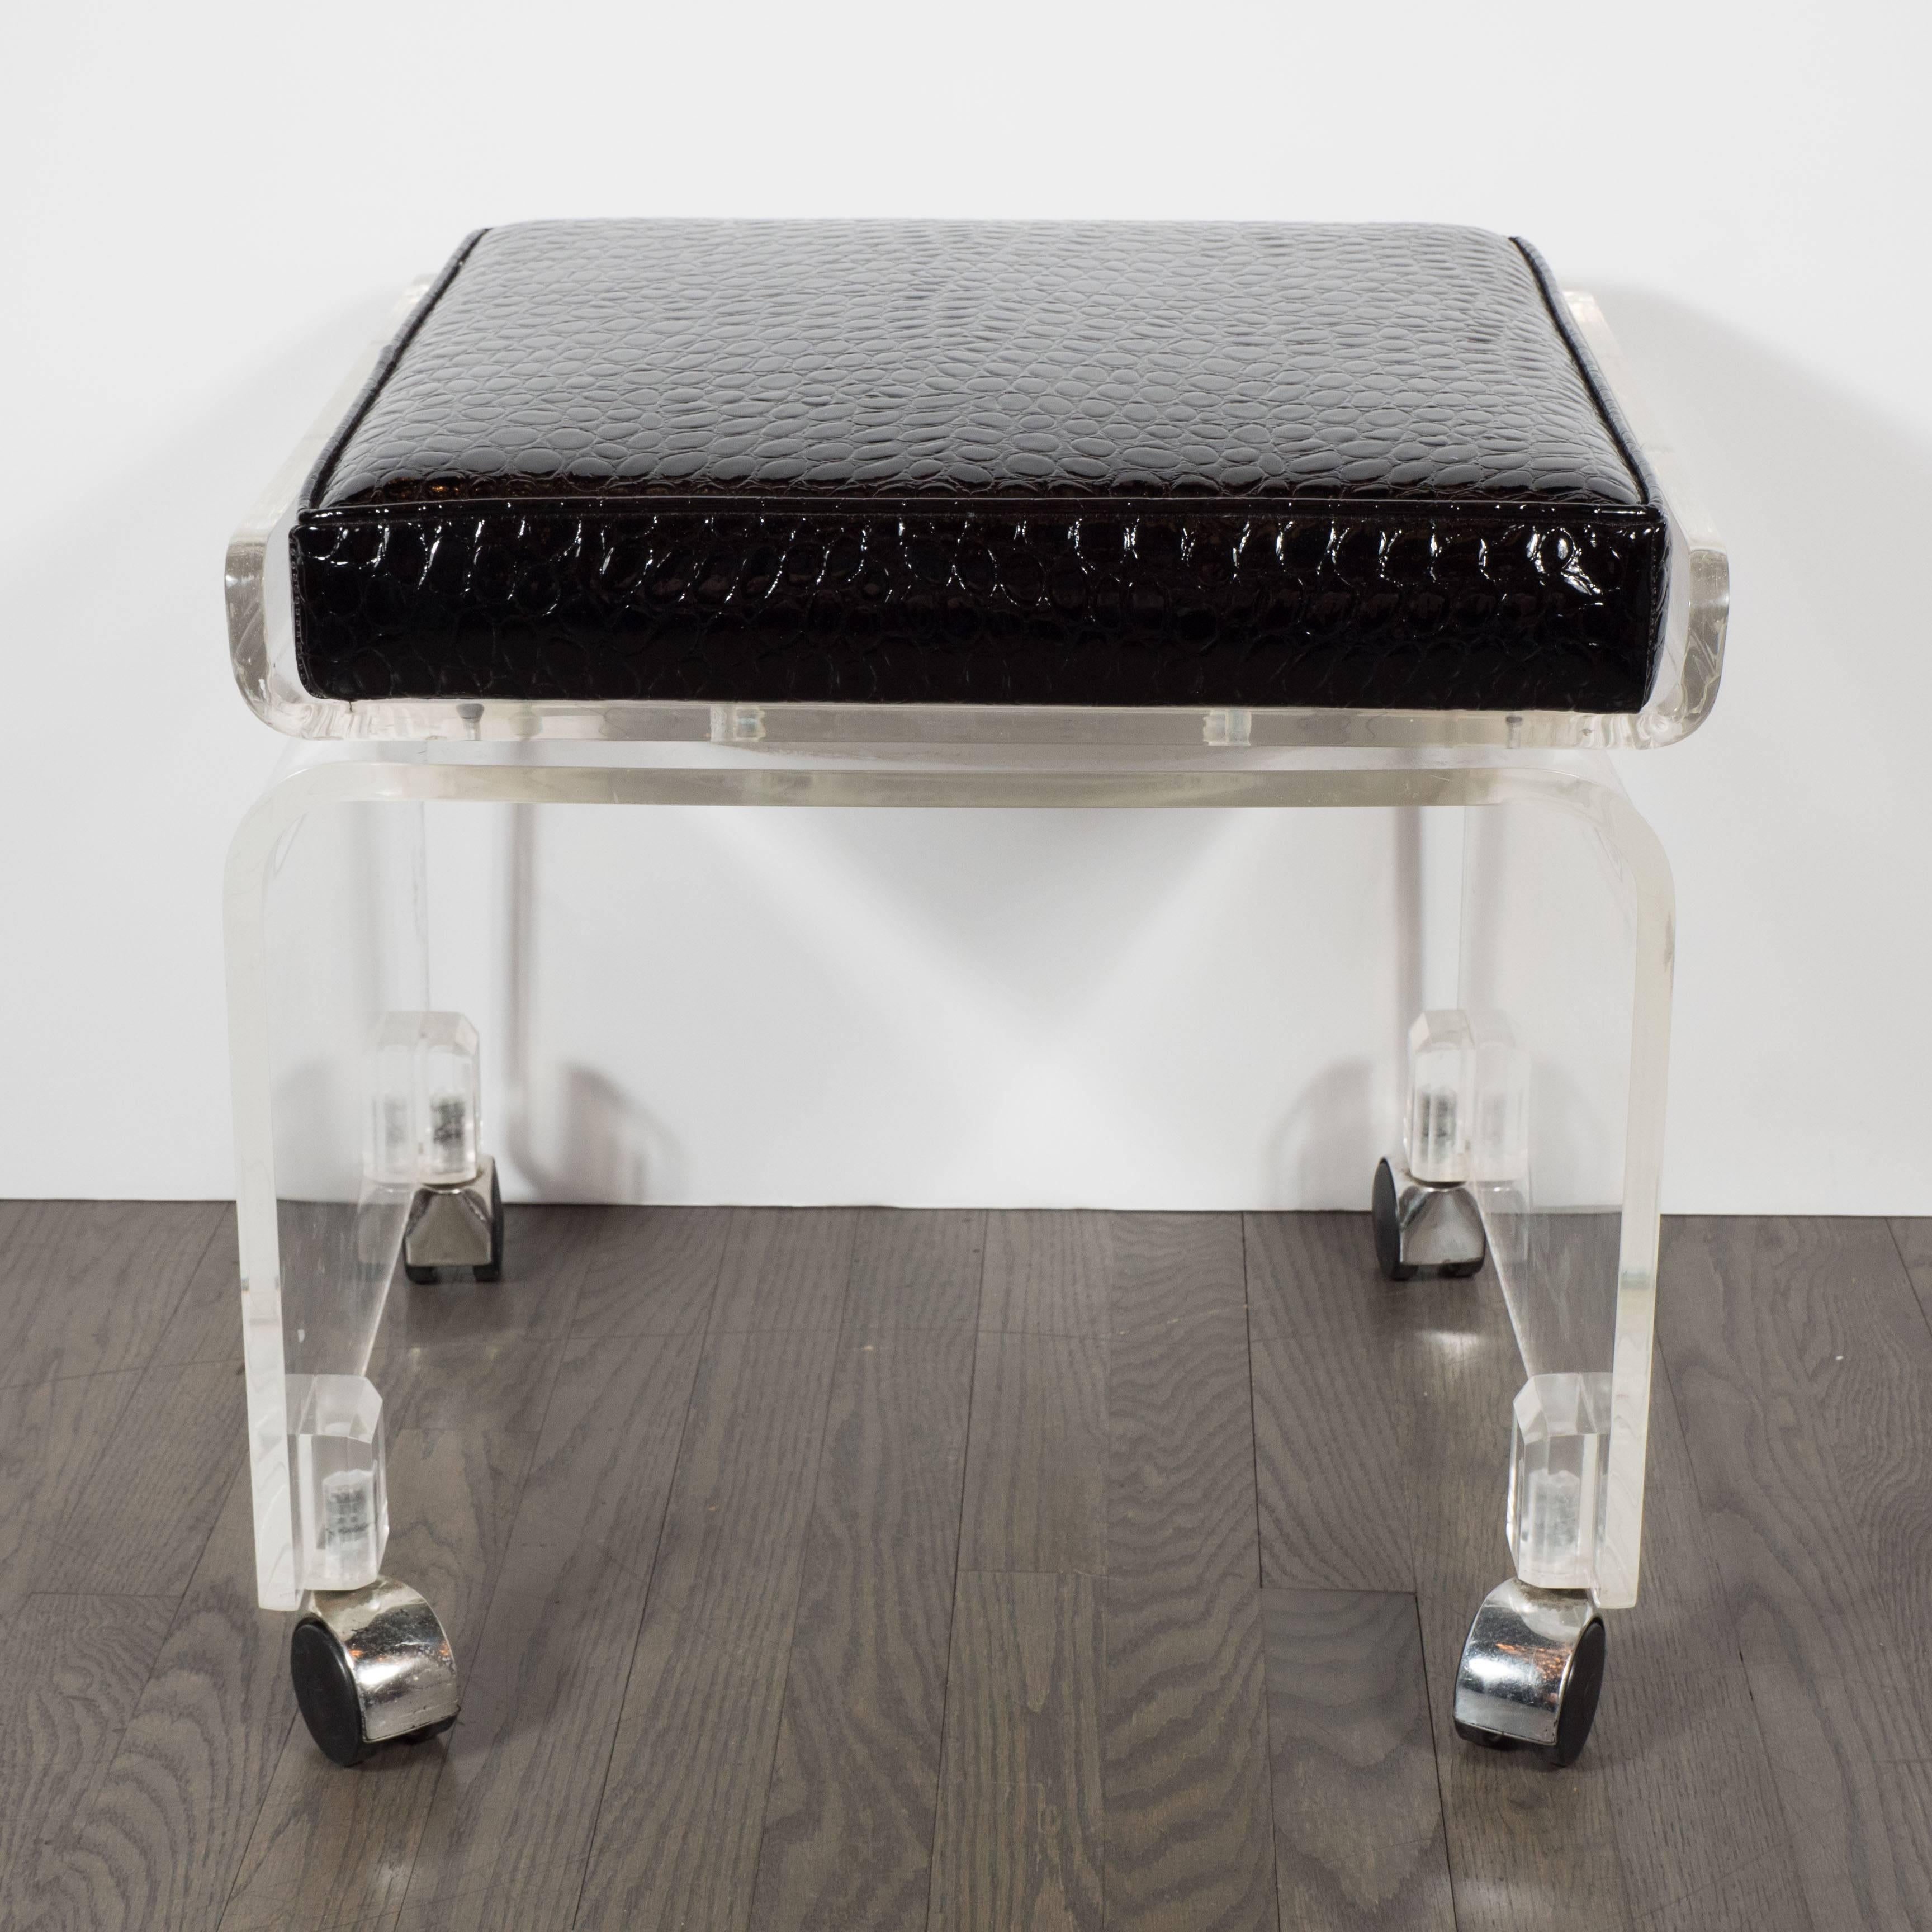 A Mid-Century Lucite swivel chair in newly upholstered faux crocodile fabric. A waterfall design is a single piece of curved Lucite is mounted on chrome-covered casters. A swivel mechanism connects the seat, which itself has a wraparound curved